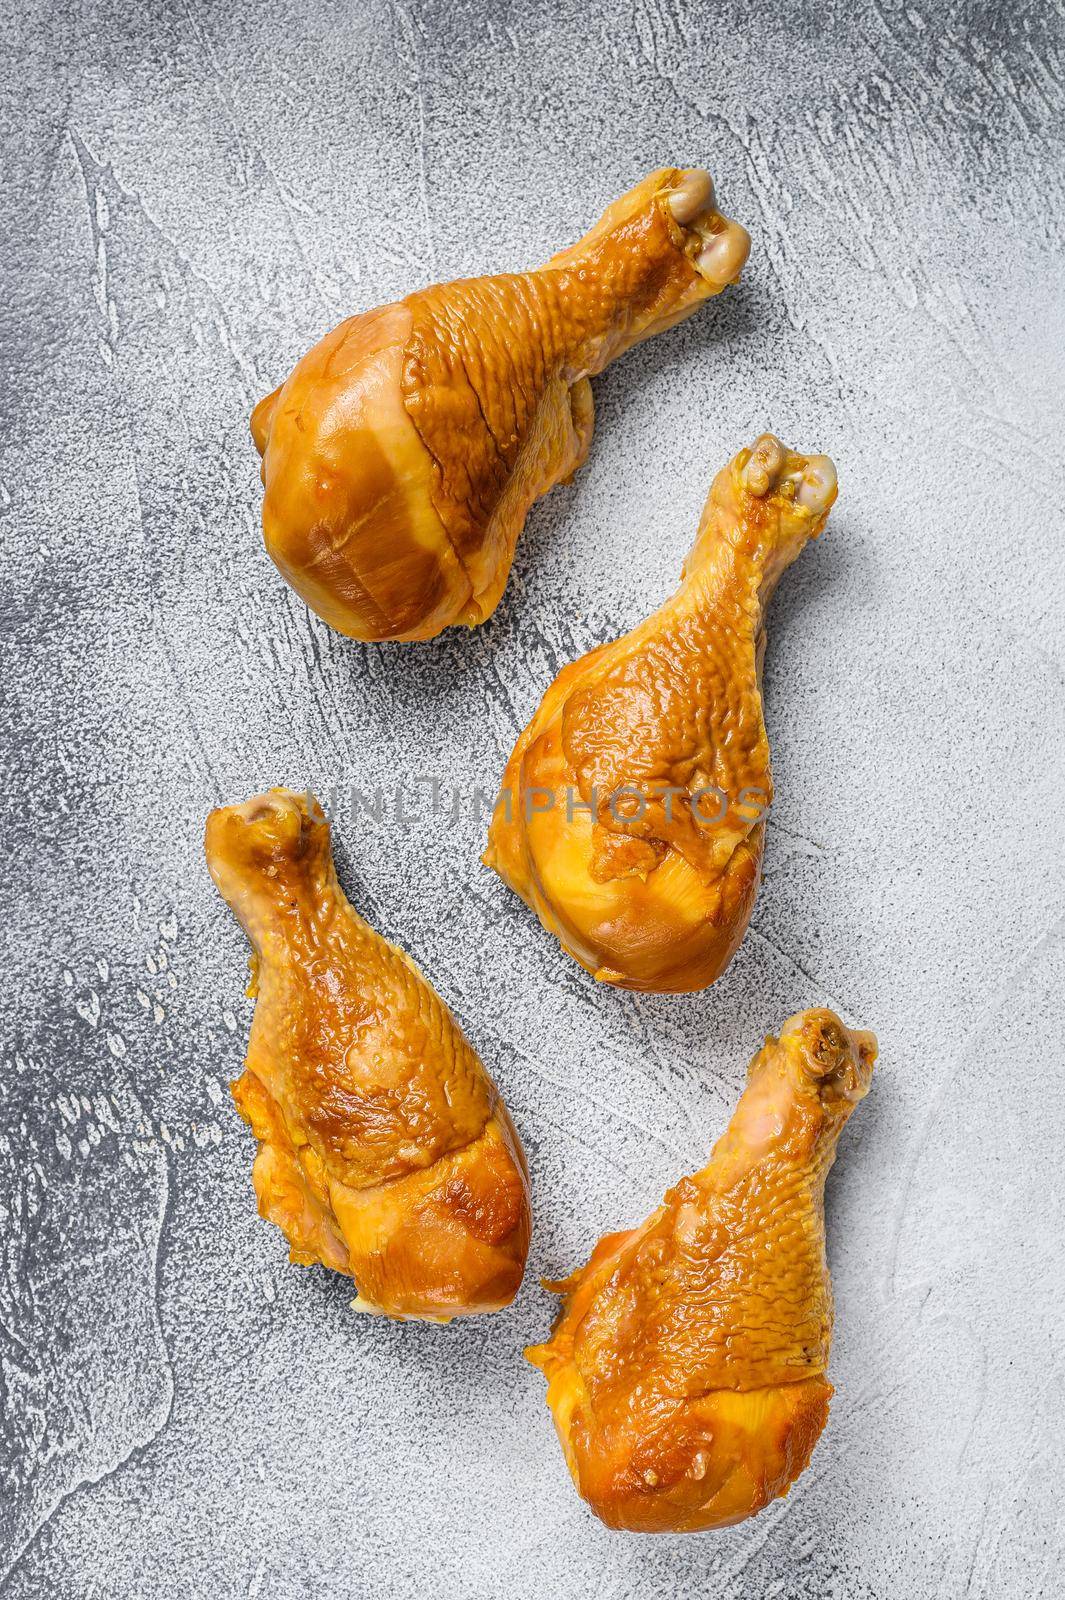 Smoked chicken leg drumsticks on a kitchen table. White background. Top view.